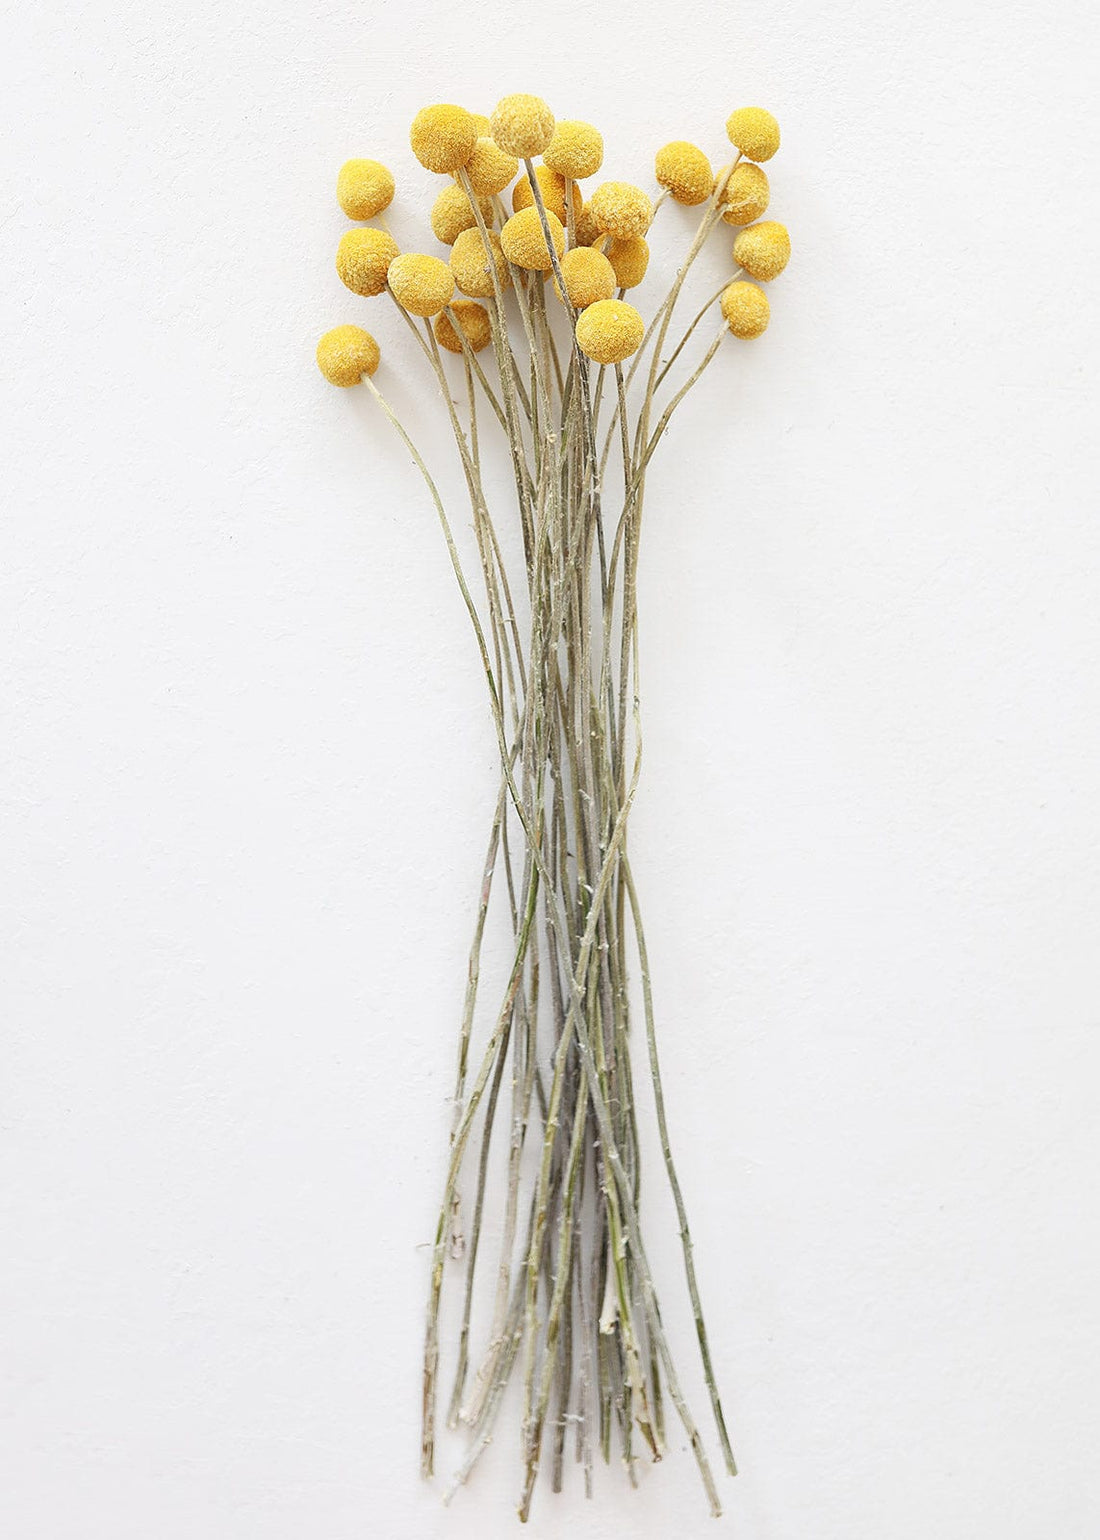 Afloral Dried Flowers Golden Yellow Billy Button Bundle